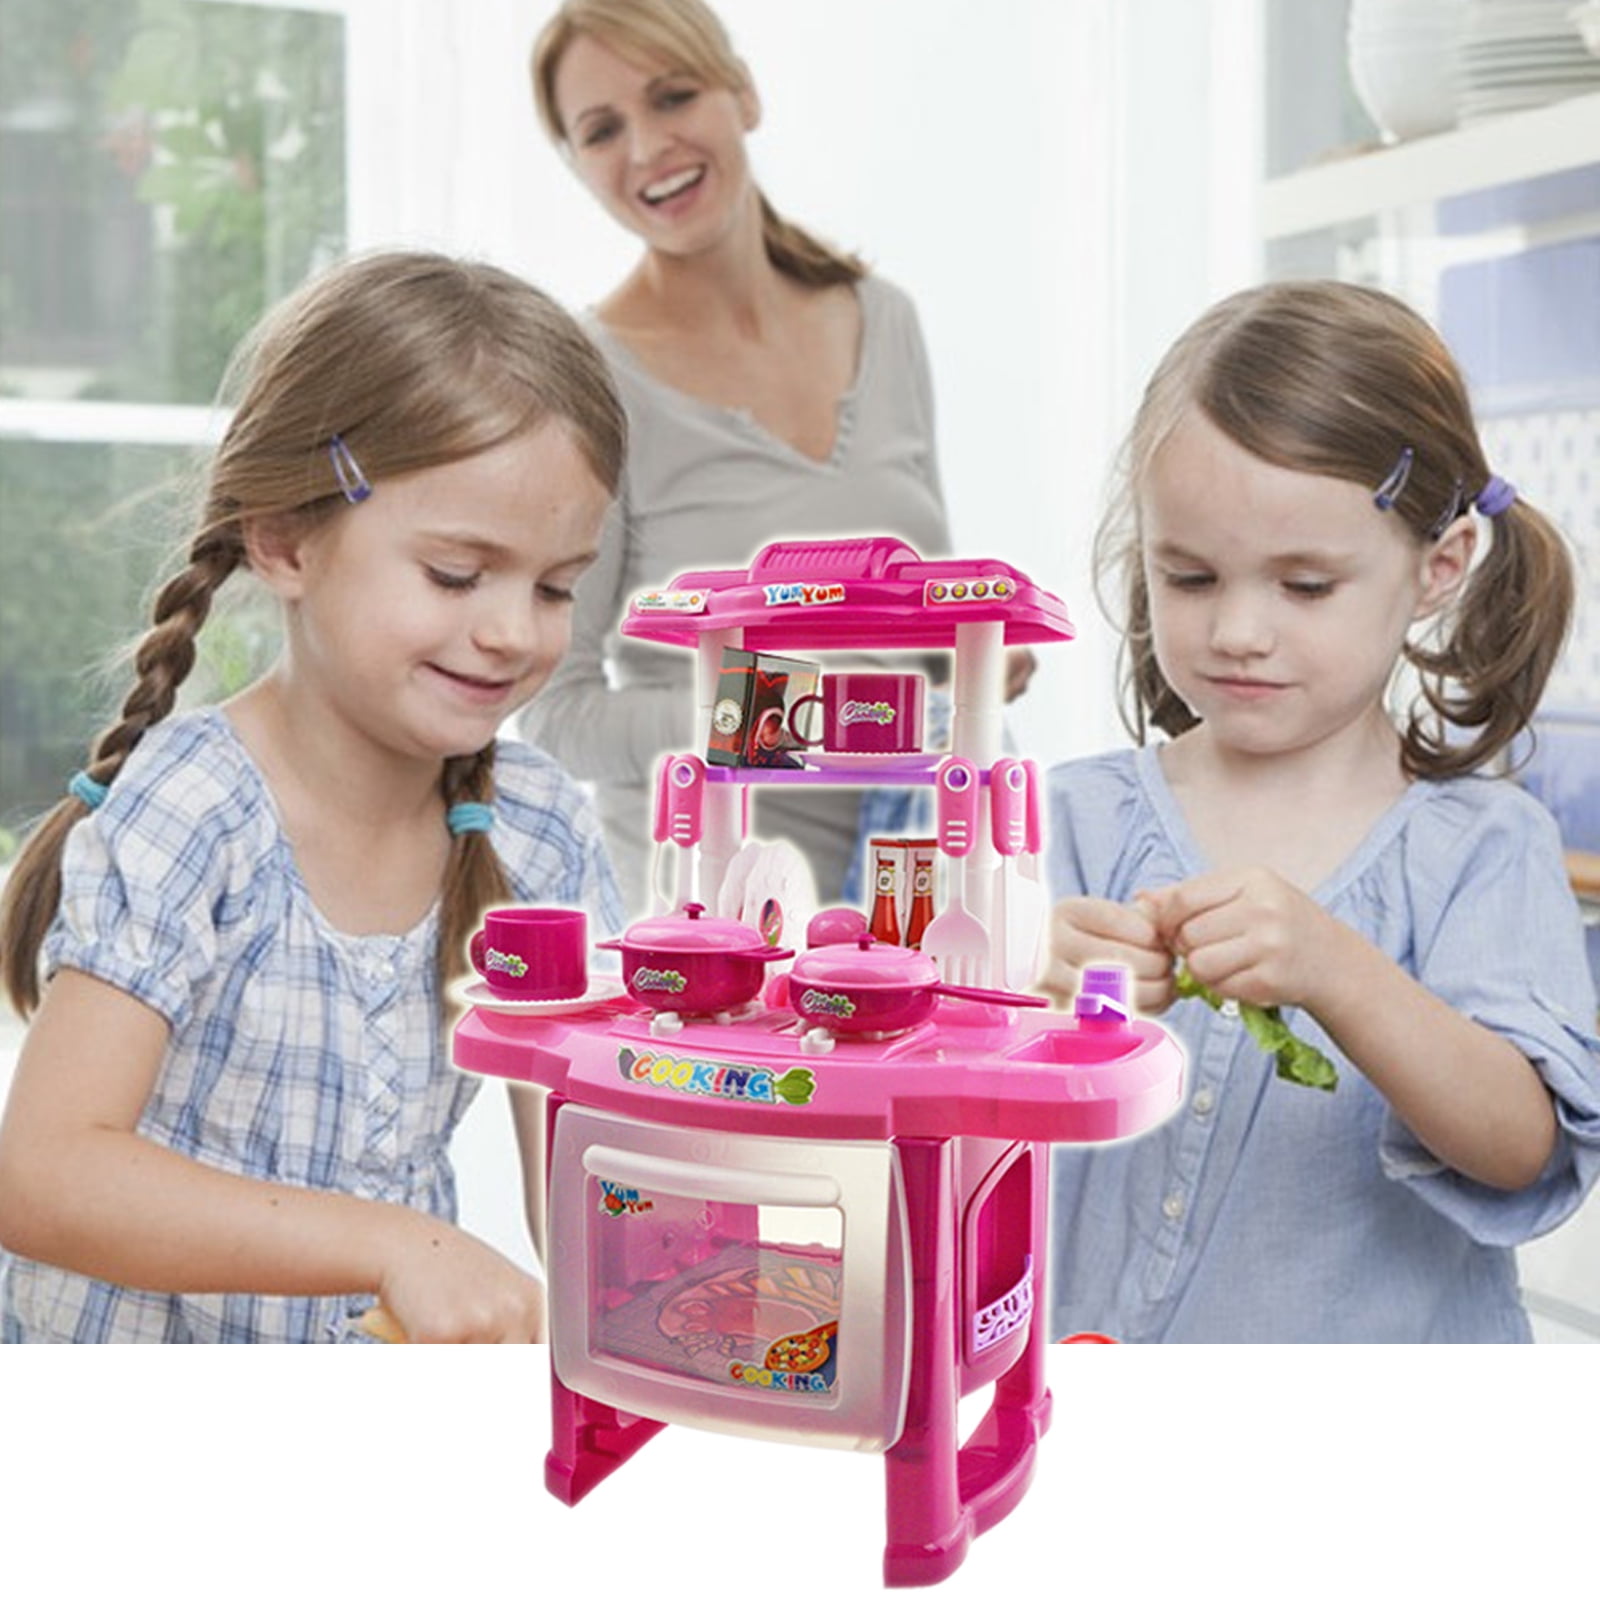 Stainless Kitchen Cooking Role Play Pretend Toys For Children Pink 11pcs 